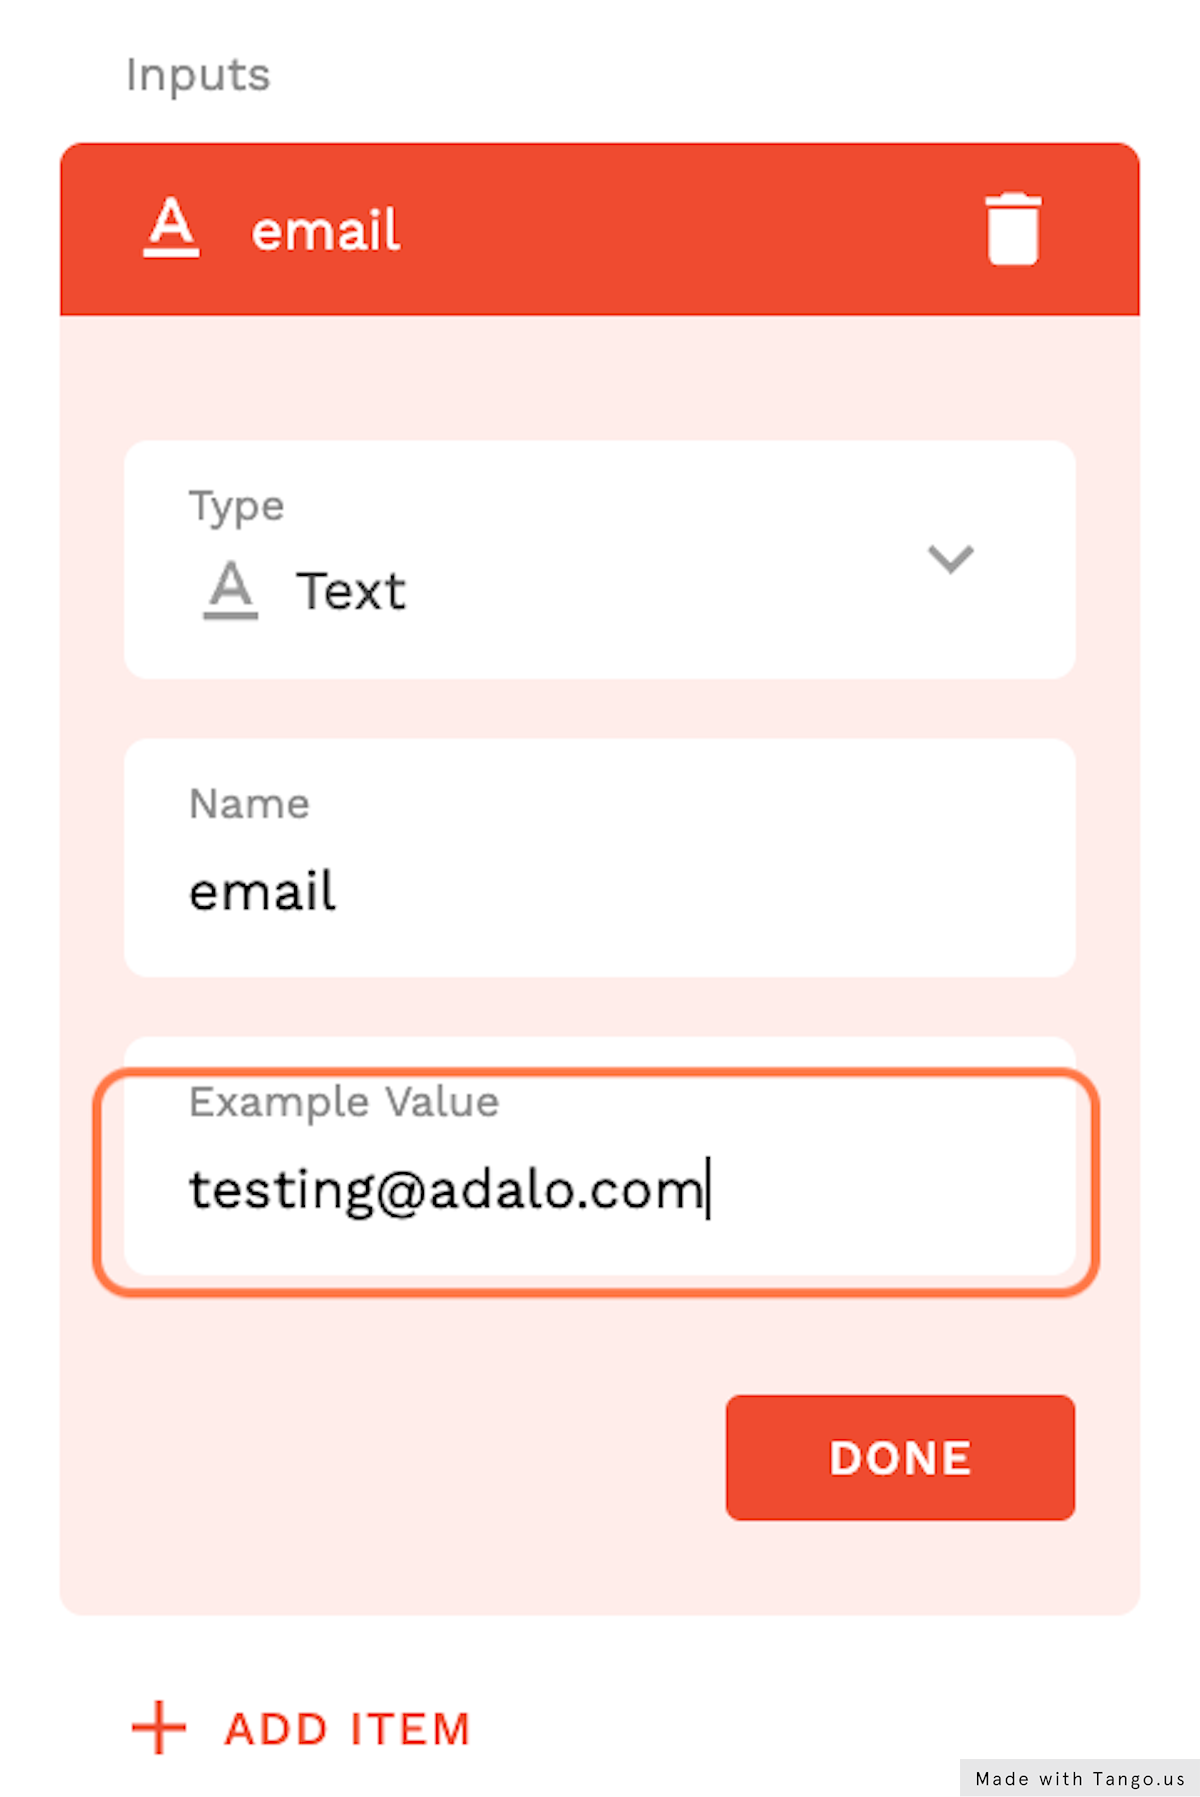 This API allows email address so we will enter an example from our Stripe Customers Dashboard.